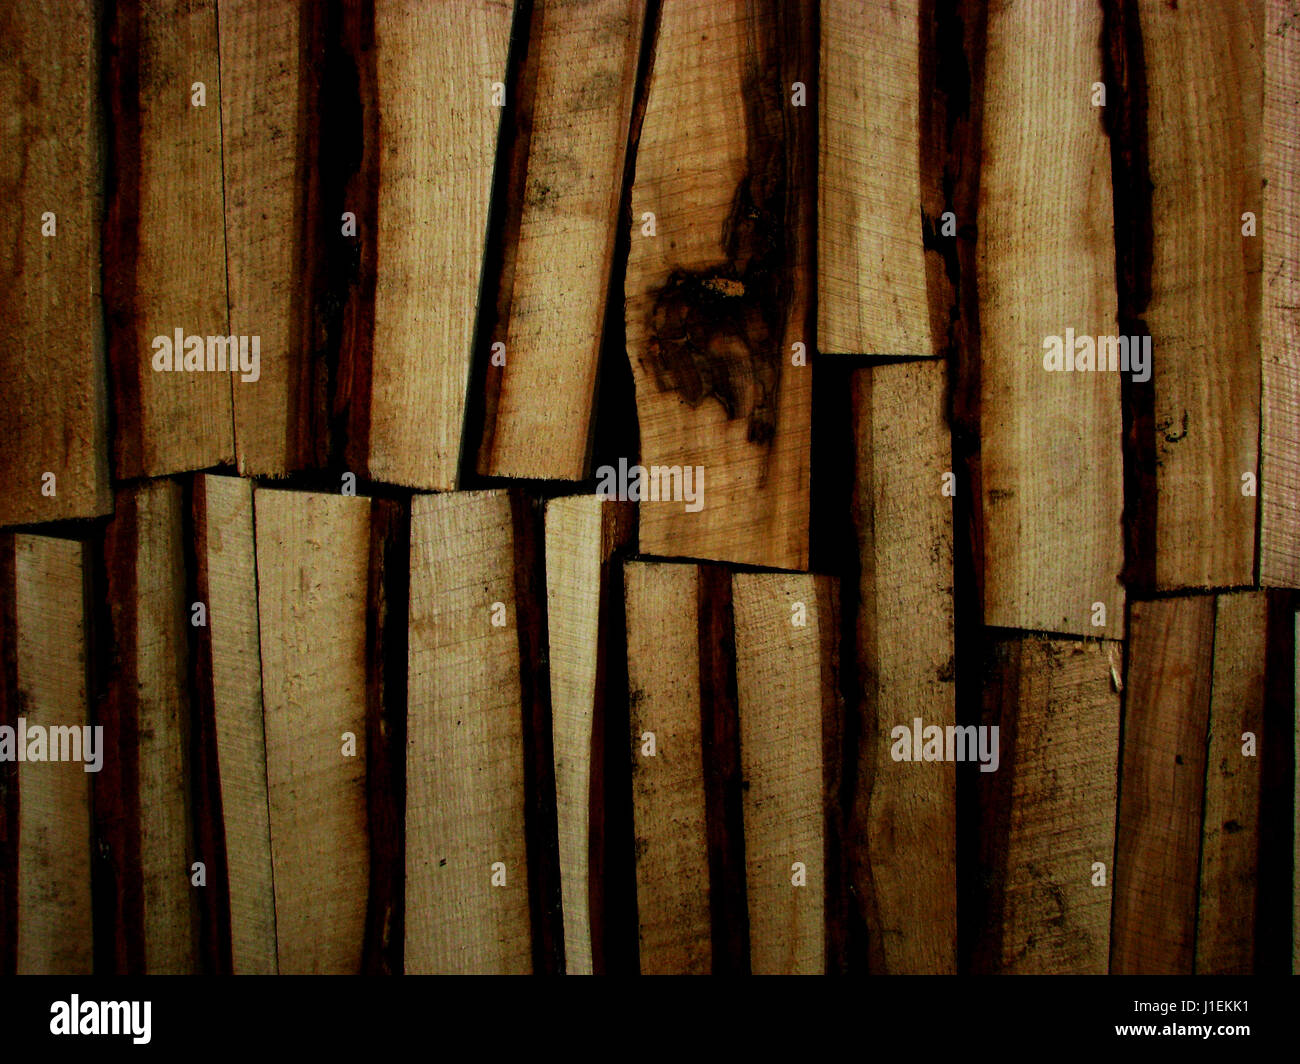 Firewood stacked in several rows Stock Photo